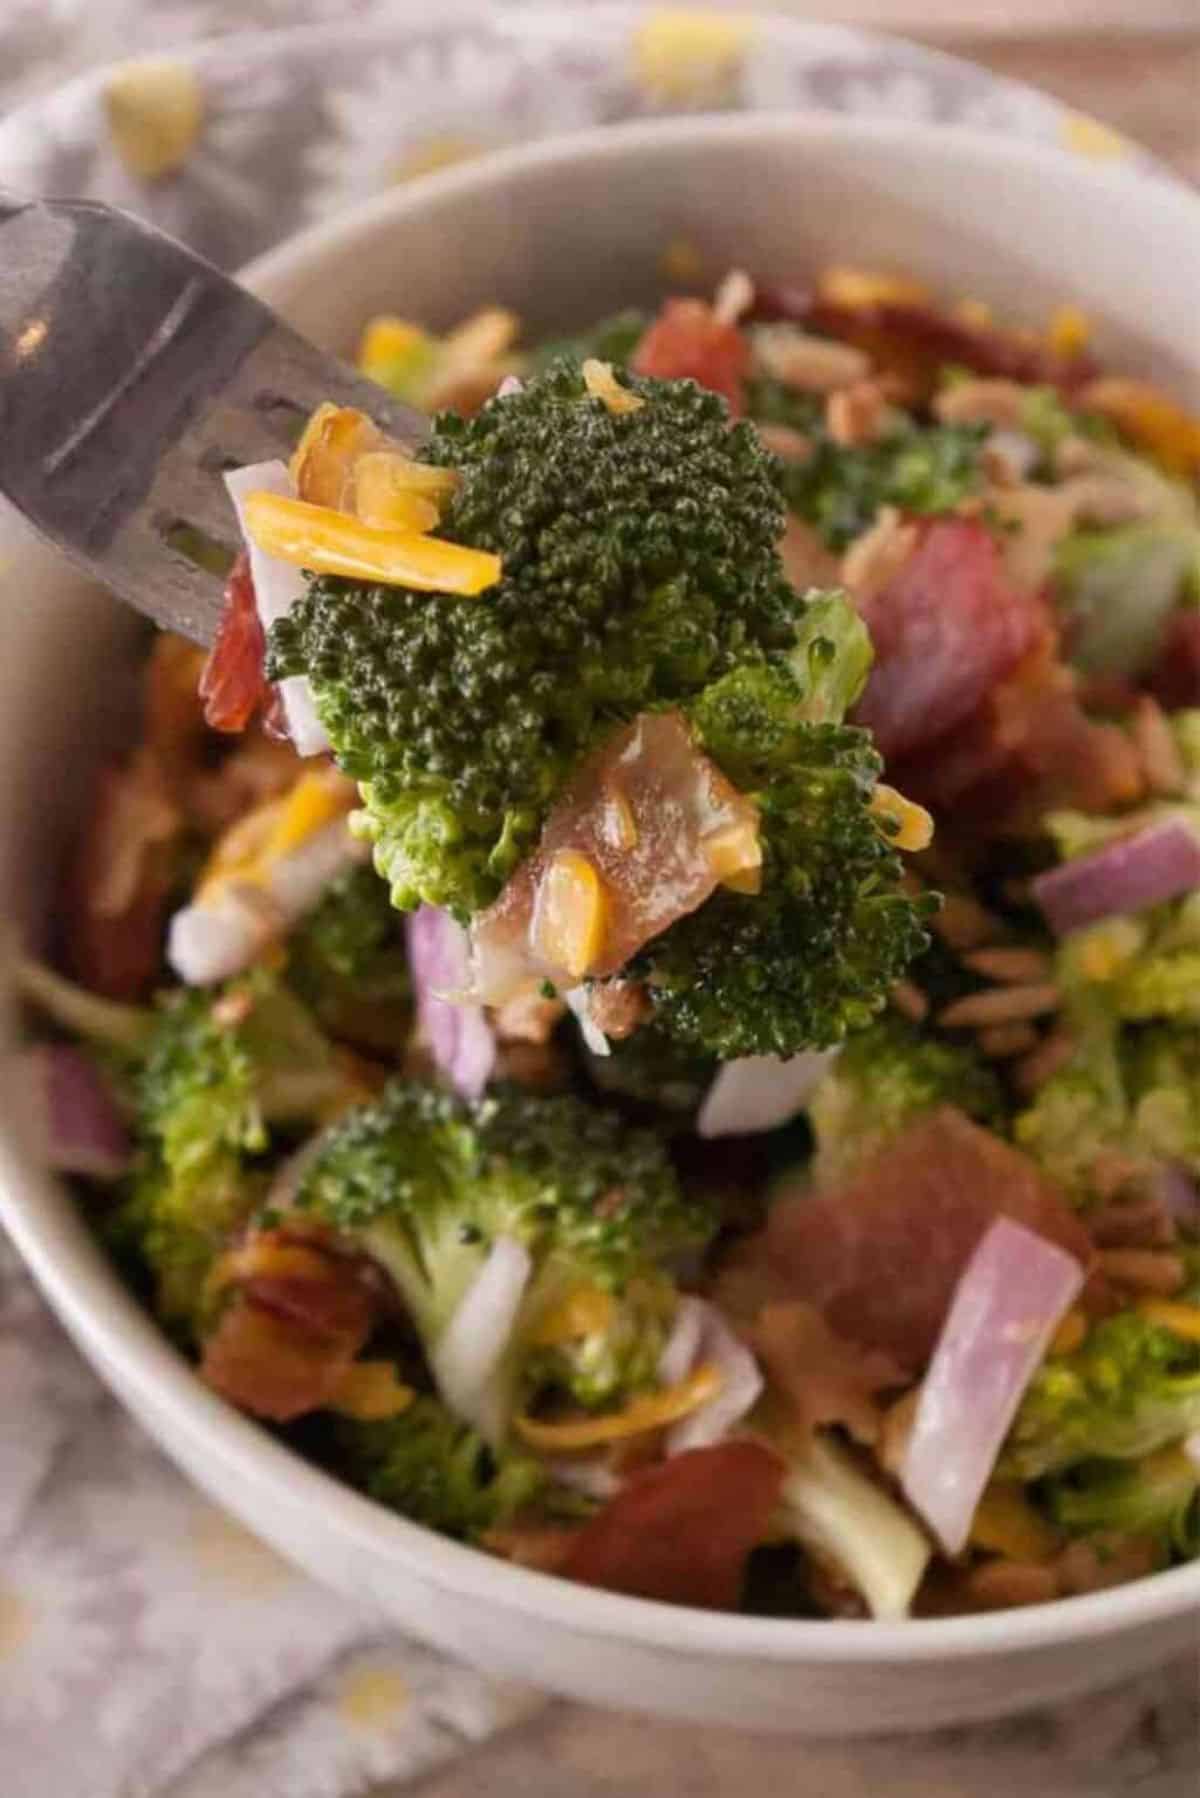 Tangy Broccoli Salad in a gray bowl picked with a fork.